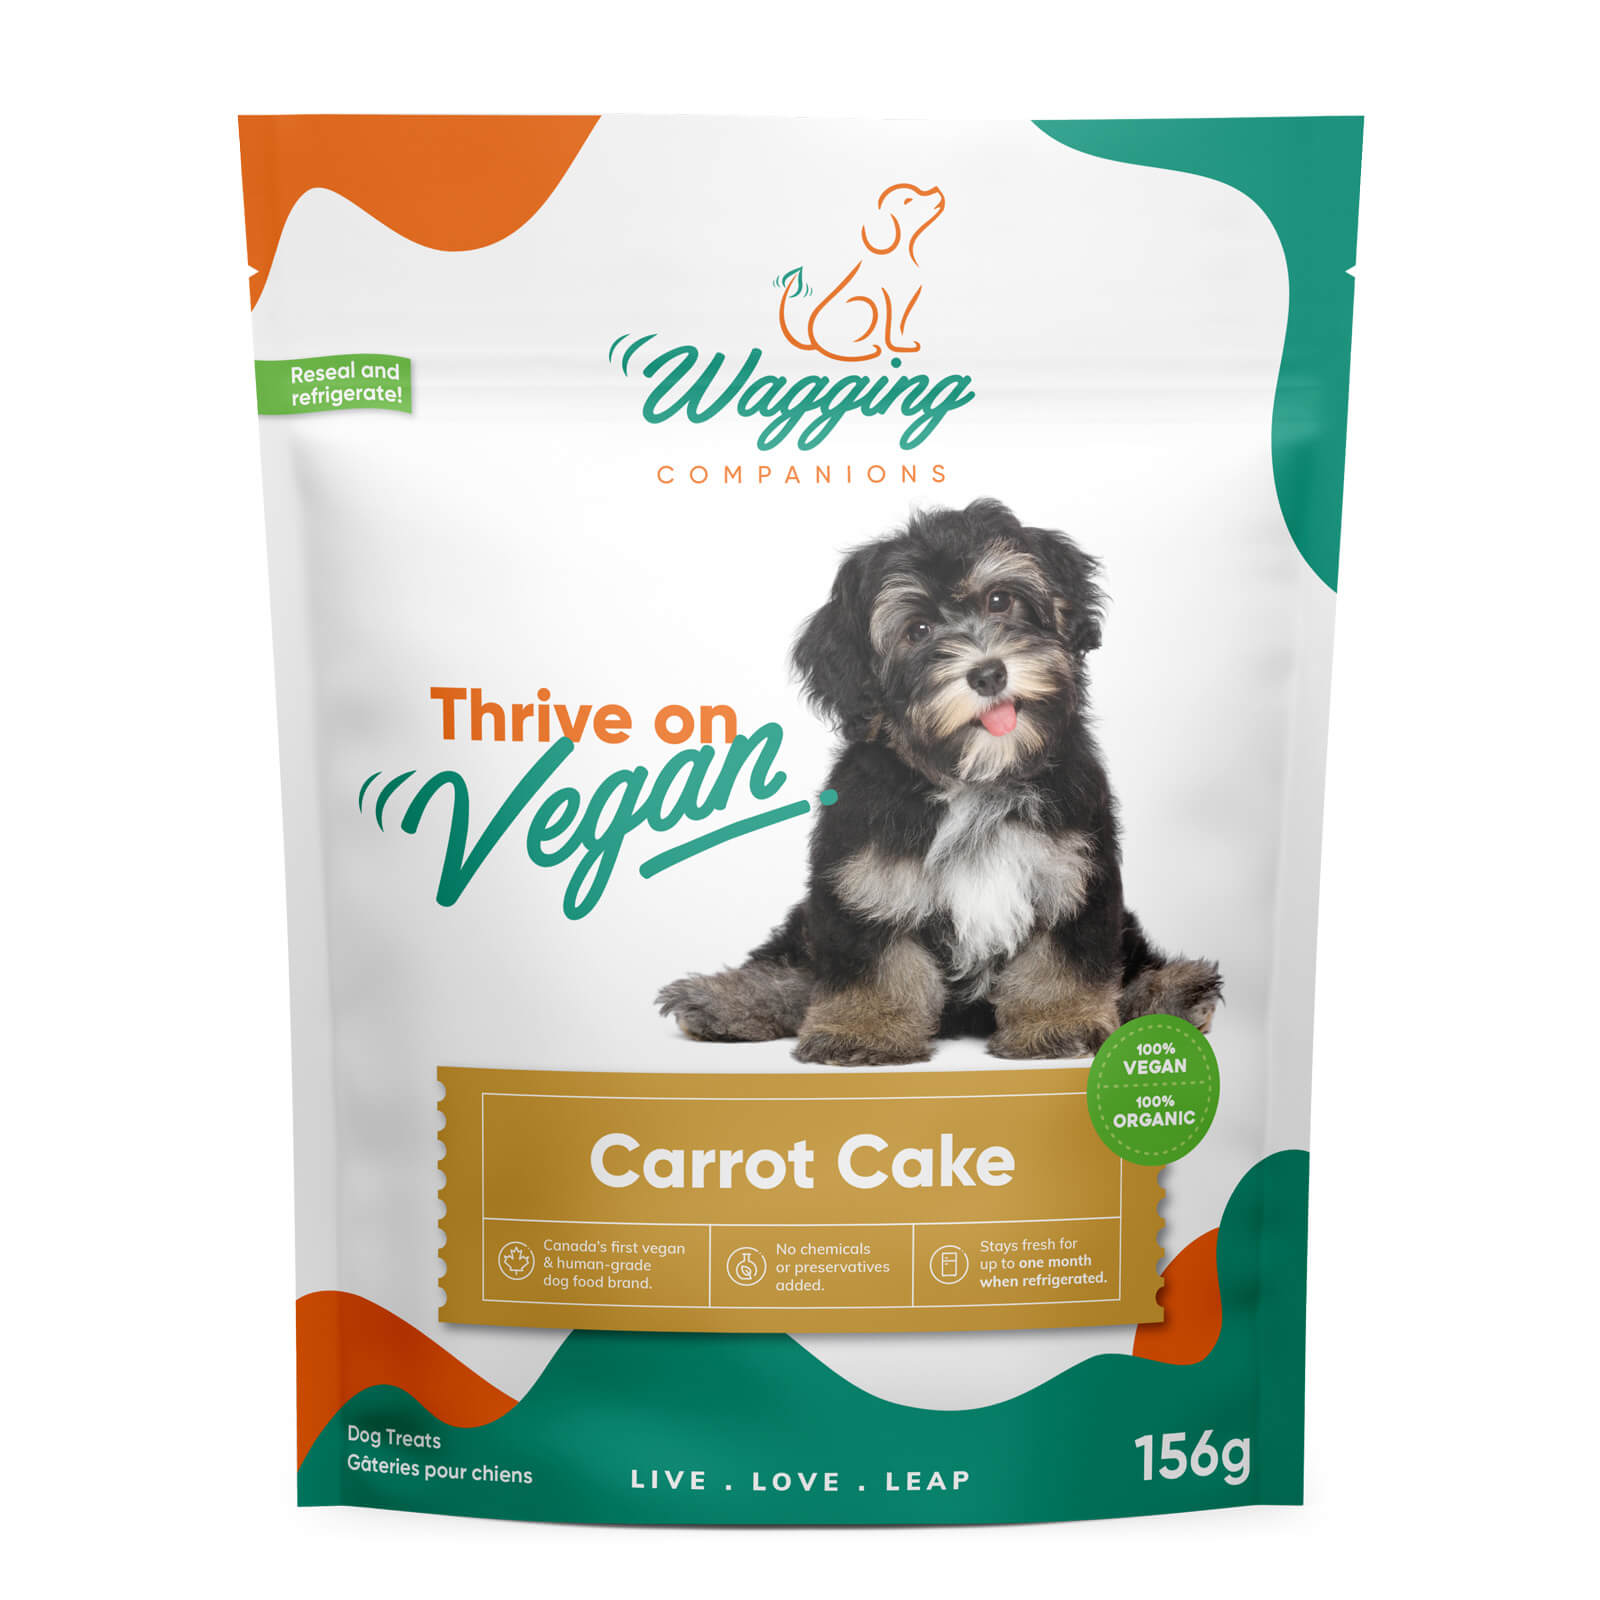 Front view of carrot cake dog treat package, proudly displaying its plant-based, 100% vegan label. Package reveals prominent claim as "Canada's first vegan and human-grade dog food brand".